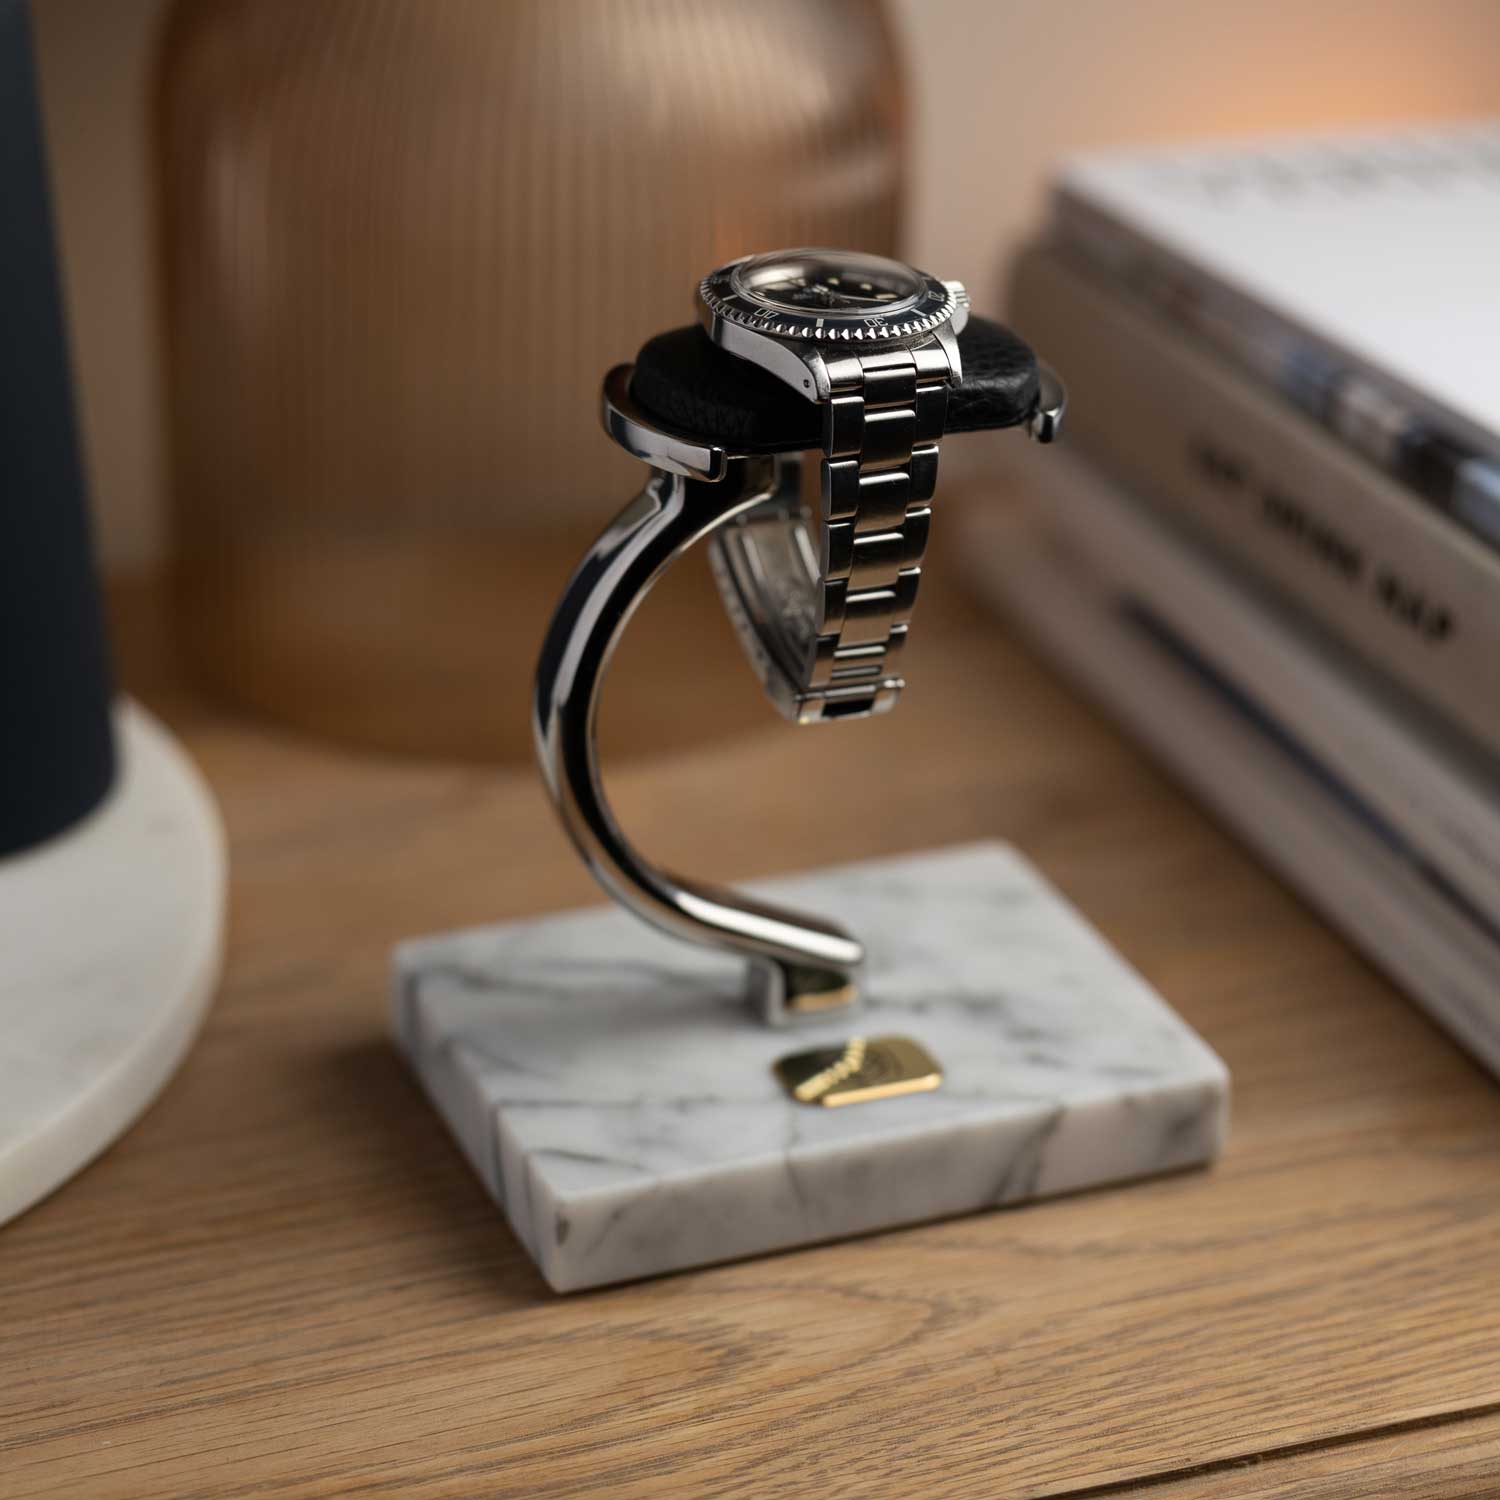 The Chronobay Watch Stand (Image: @way2wei)